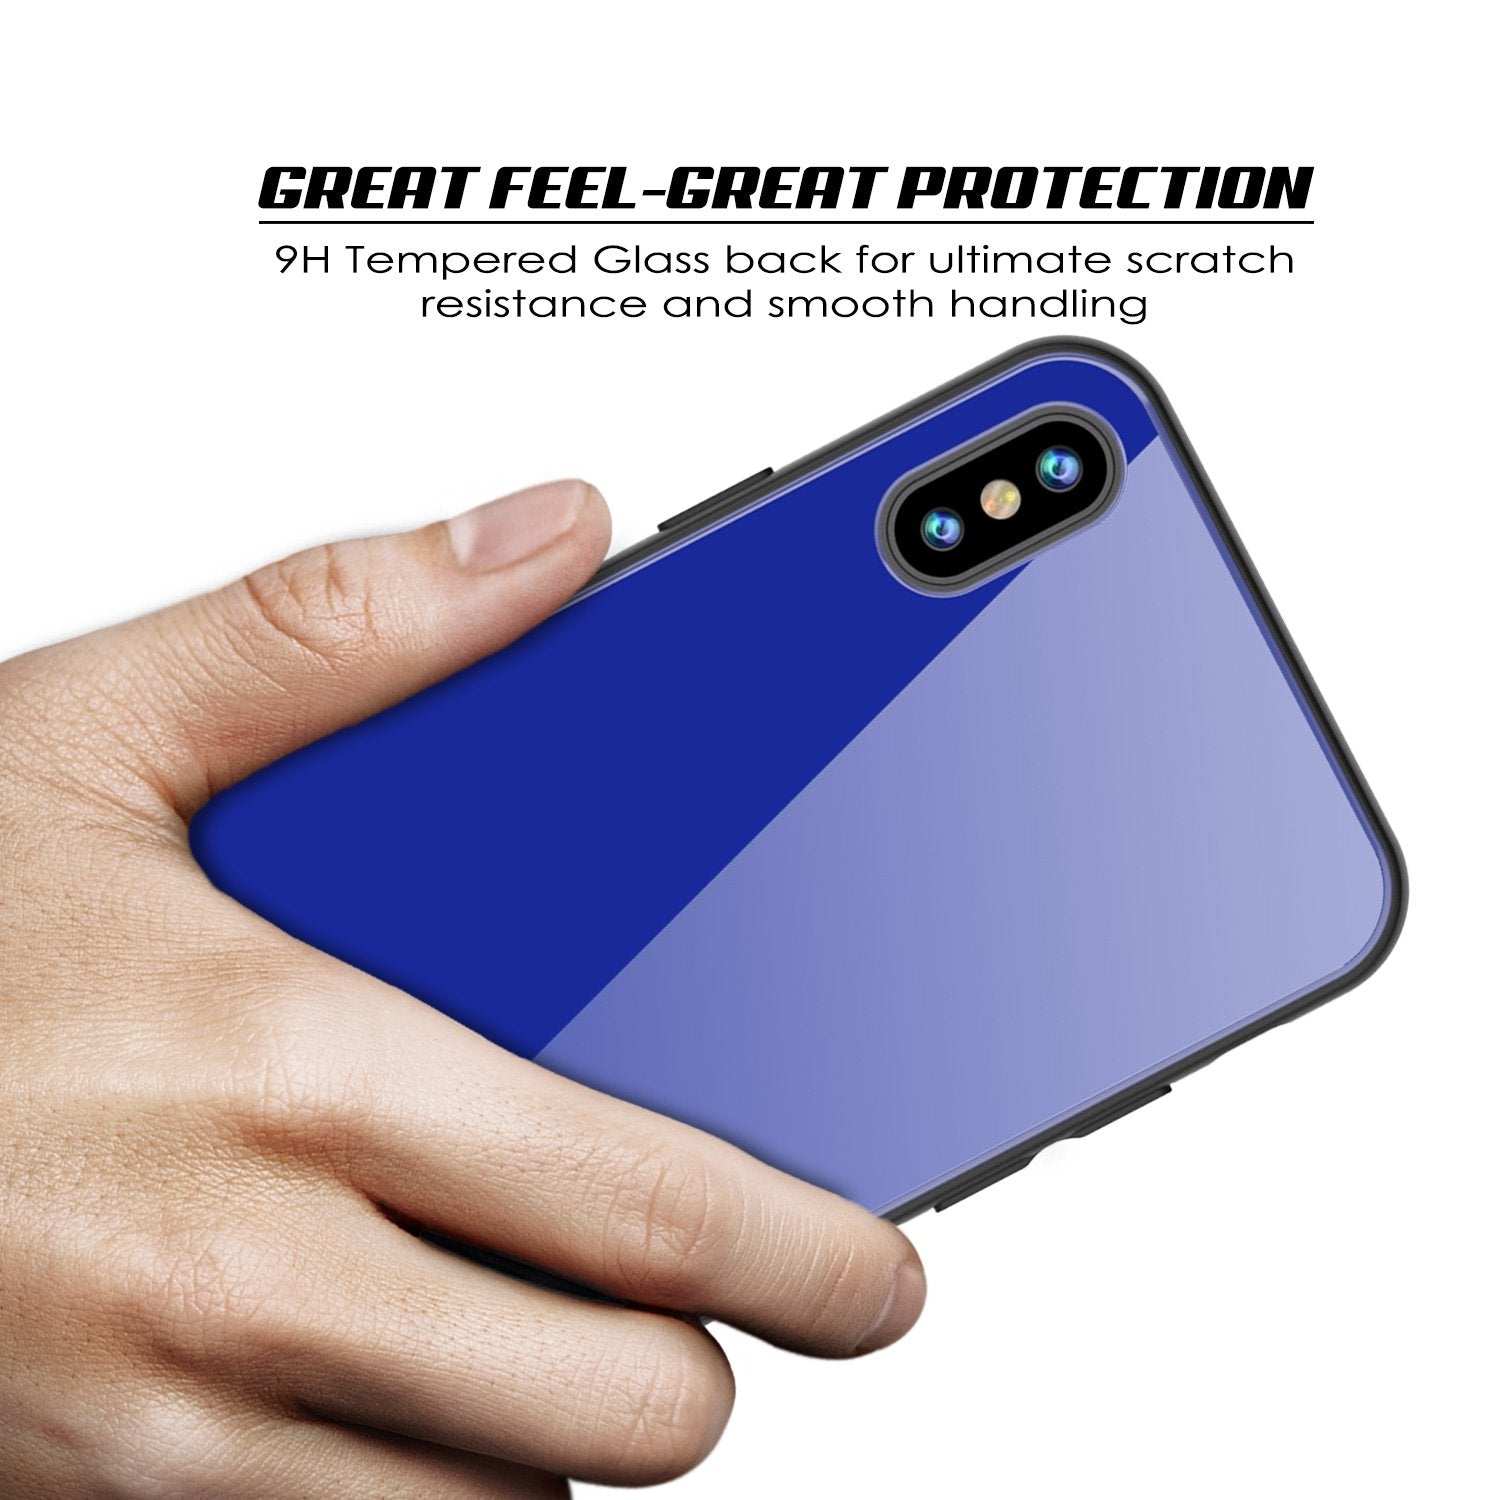 iPhone X Case, Punkcase GlassShield Ultra Thin Protectiv Cover, BLUE